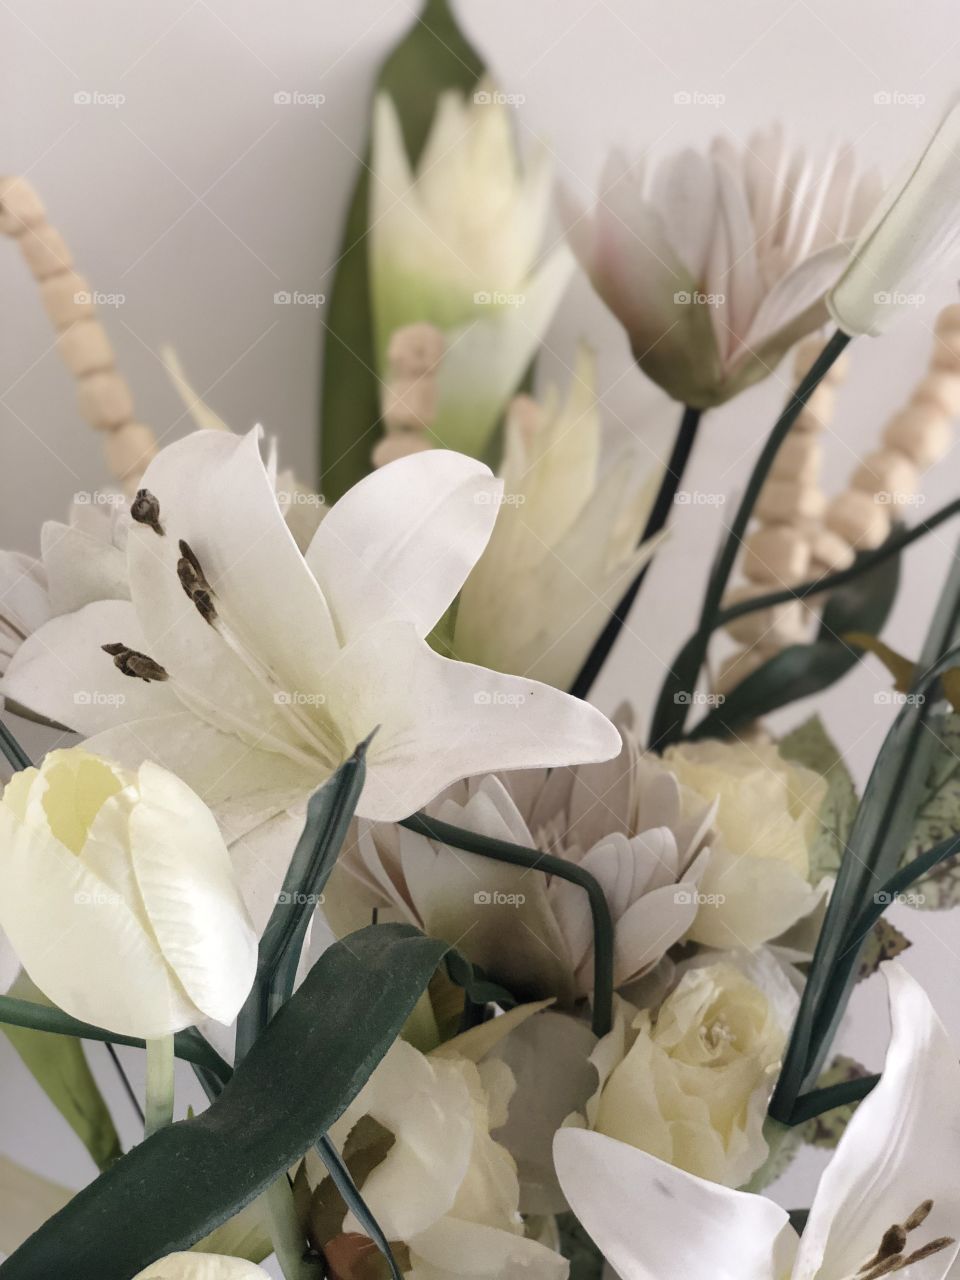 This beautiful arrangement of white flowers and leaves shows how lovely flowers can be!